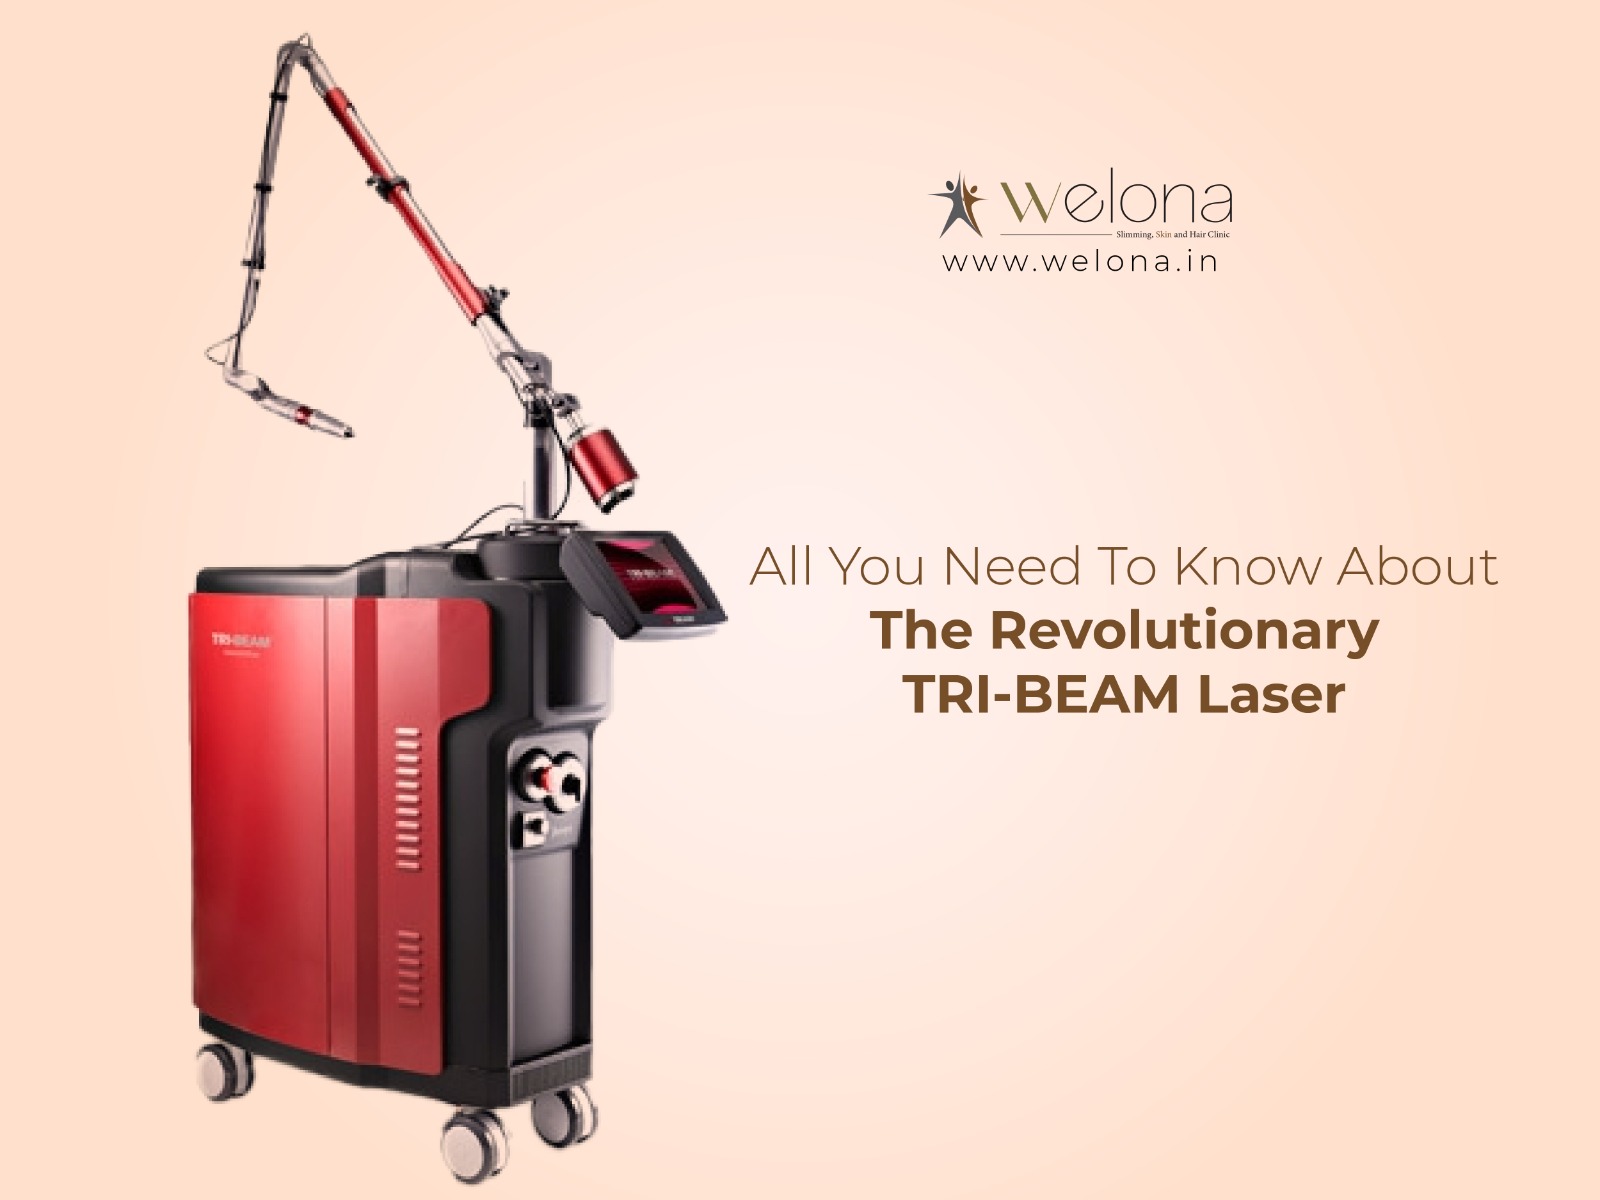 All You Need To Know About The Revolutionary TRI-BEAM Laser